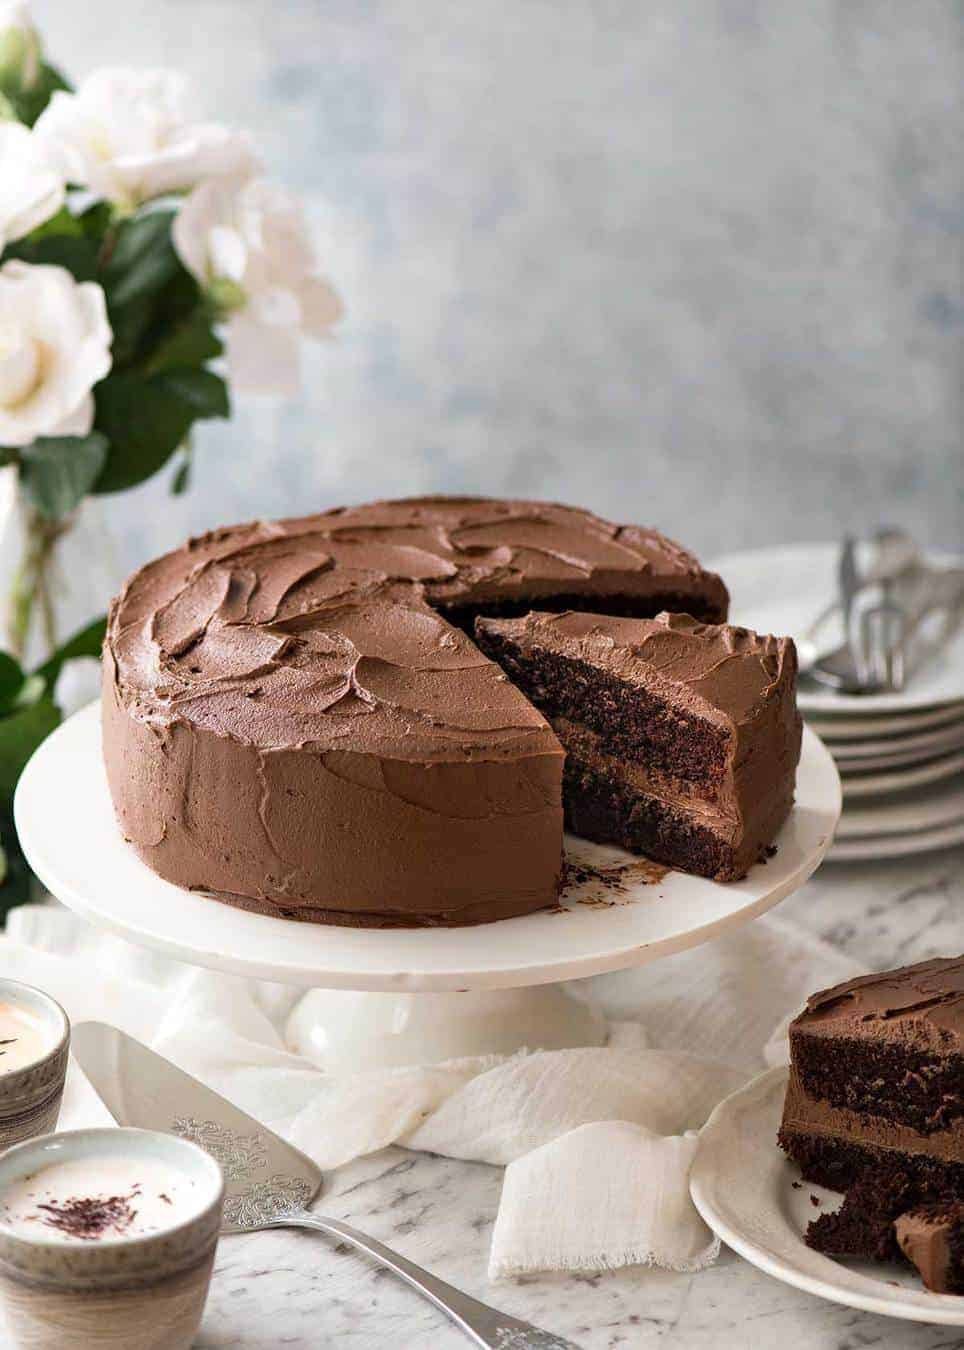 A moist Chocolate Cake with Chocolate Buttercream Frosting on a white cake platter with a slice cut and partially pulled out and a stack of dessert plates next to it.